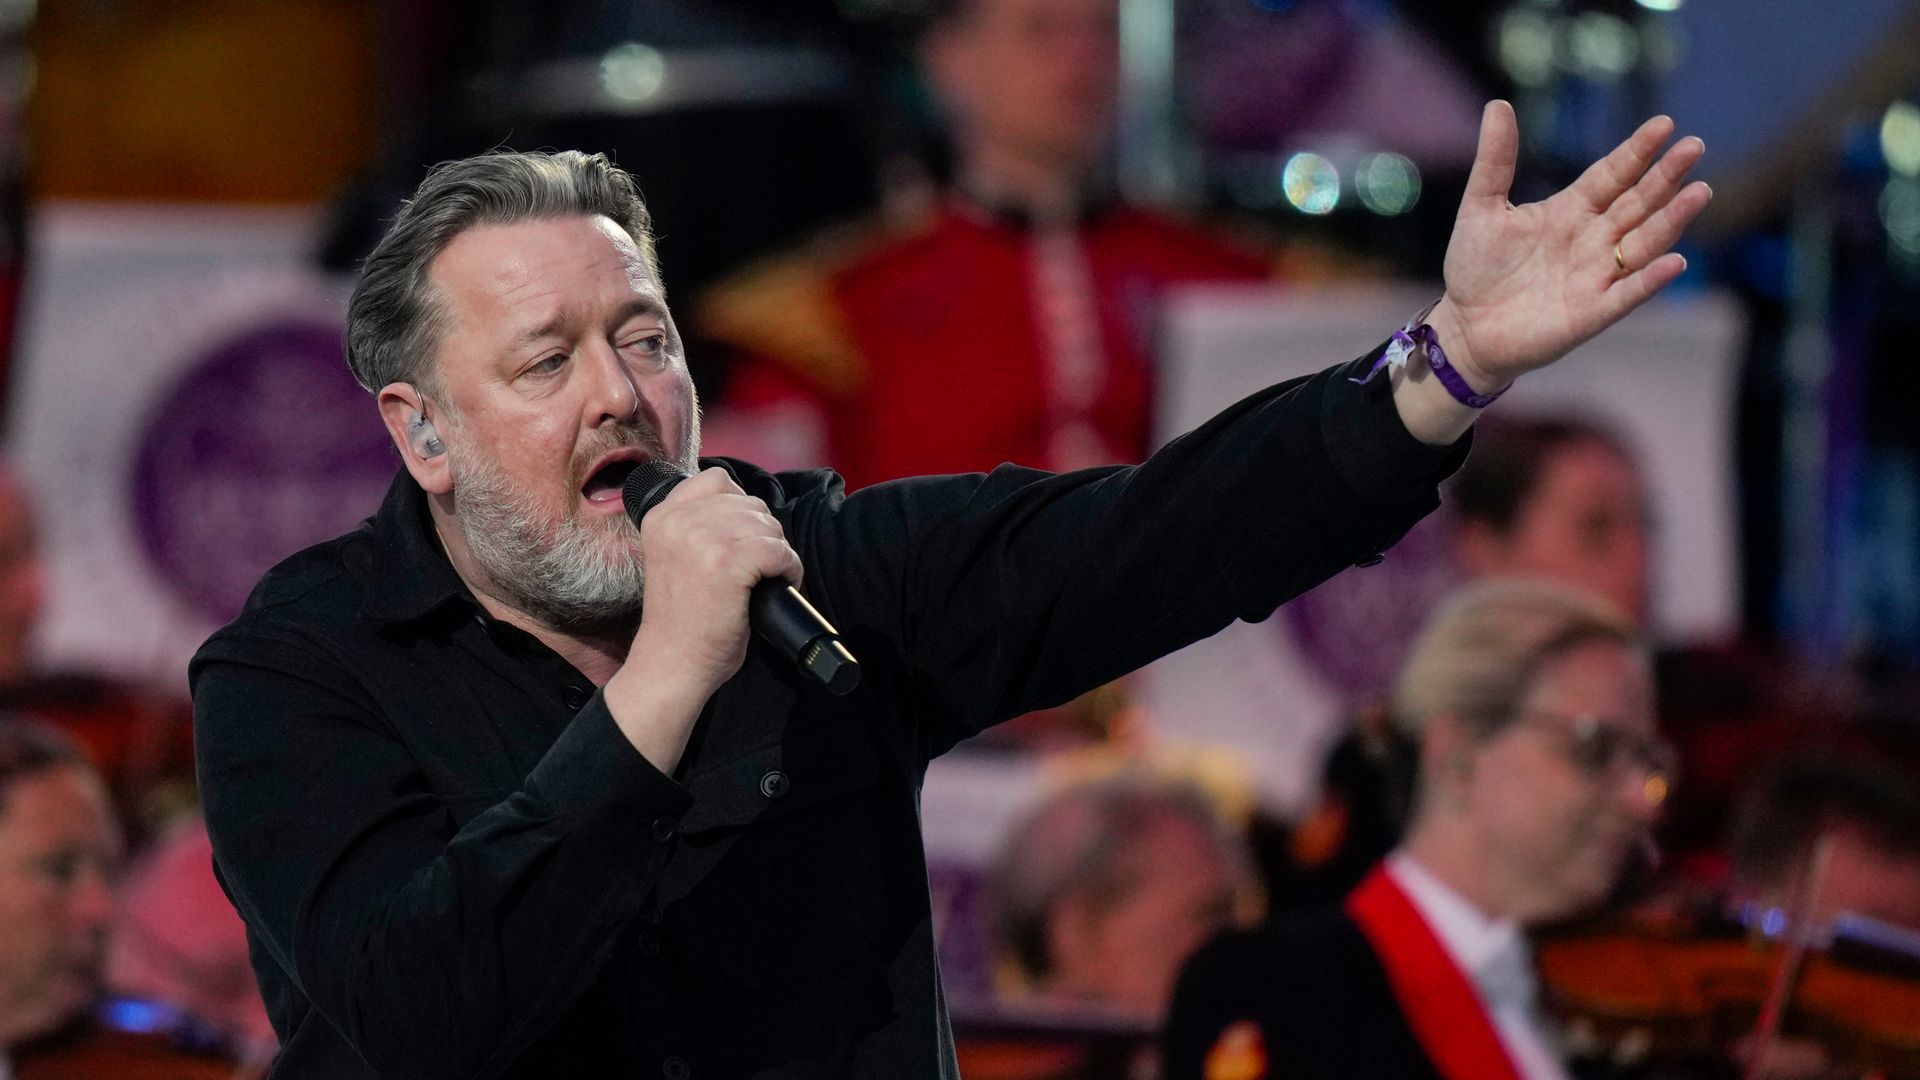 Co-op Live arena to finally open with Elbow gig following string of setbacks